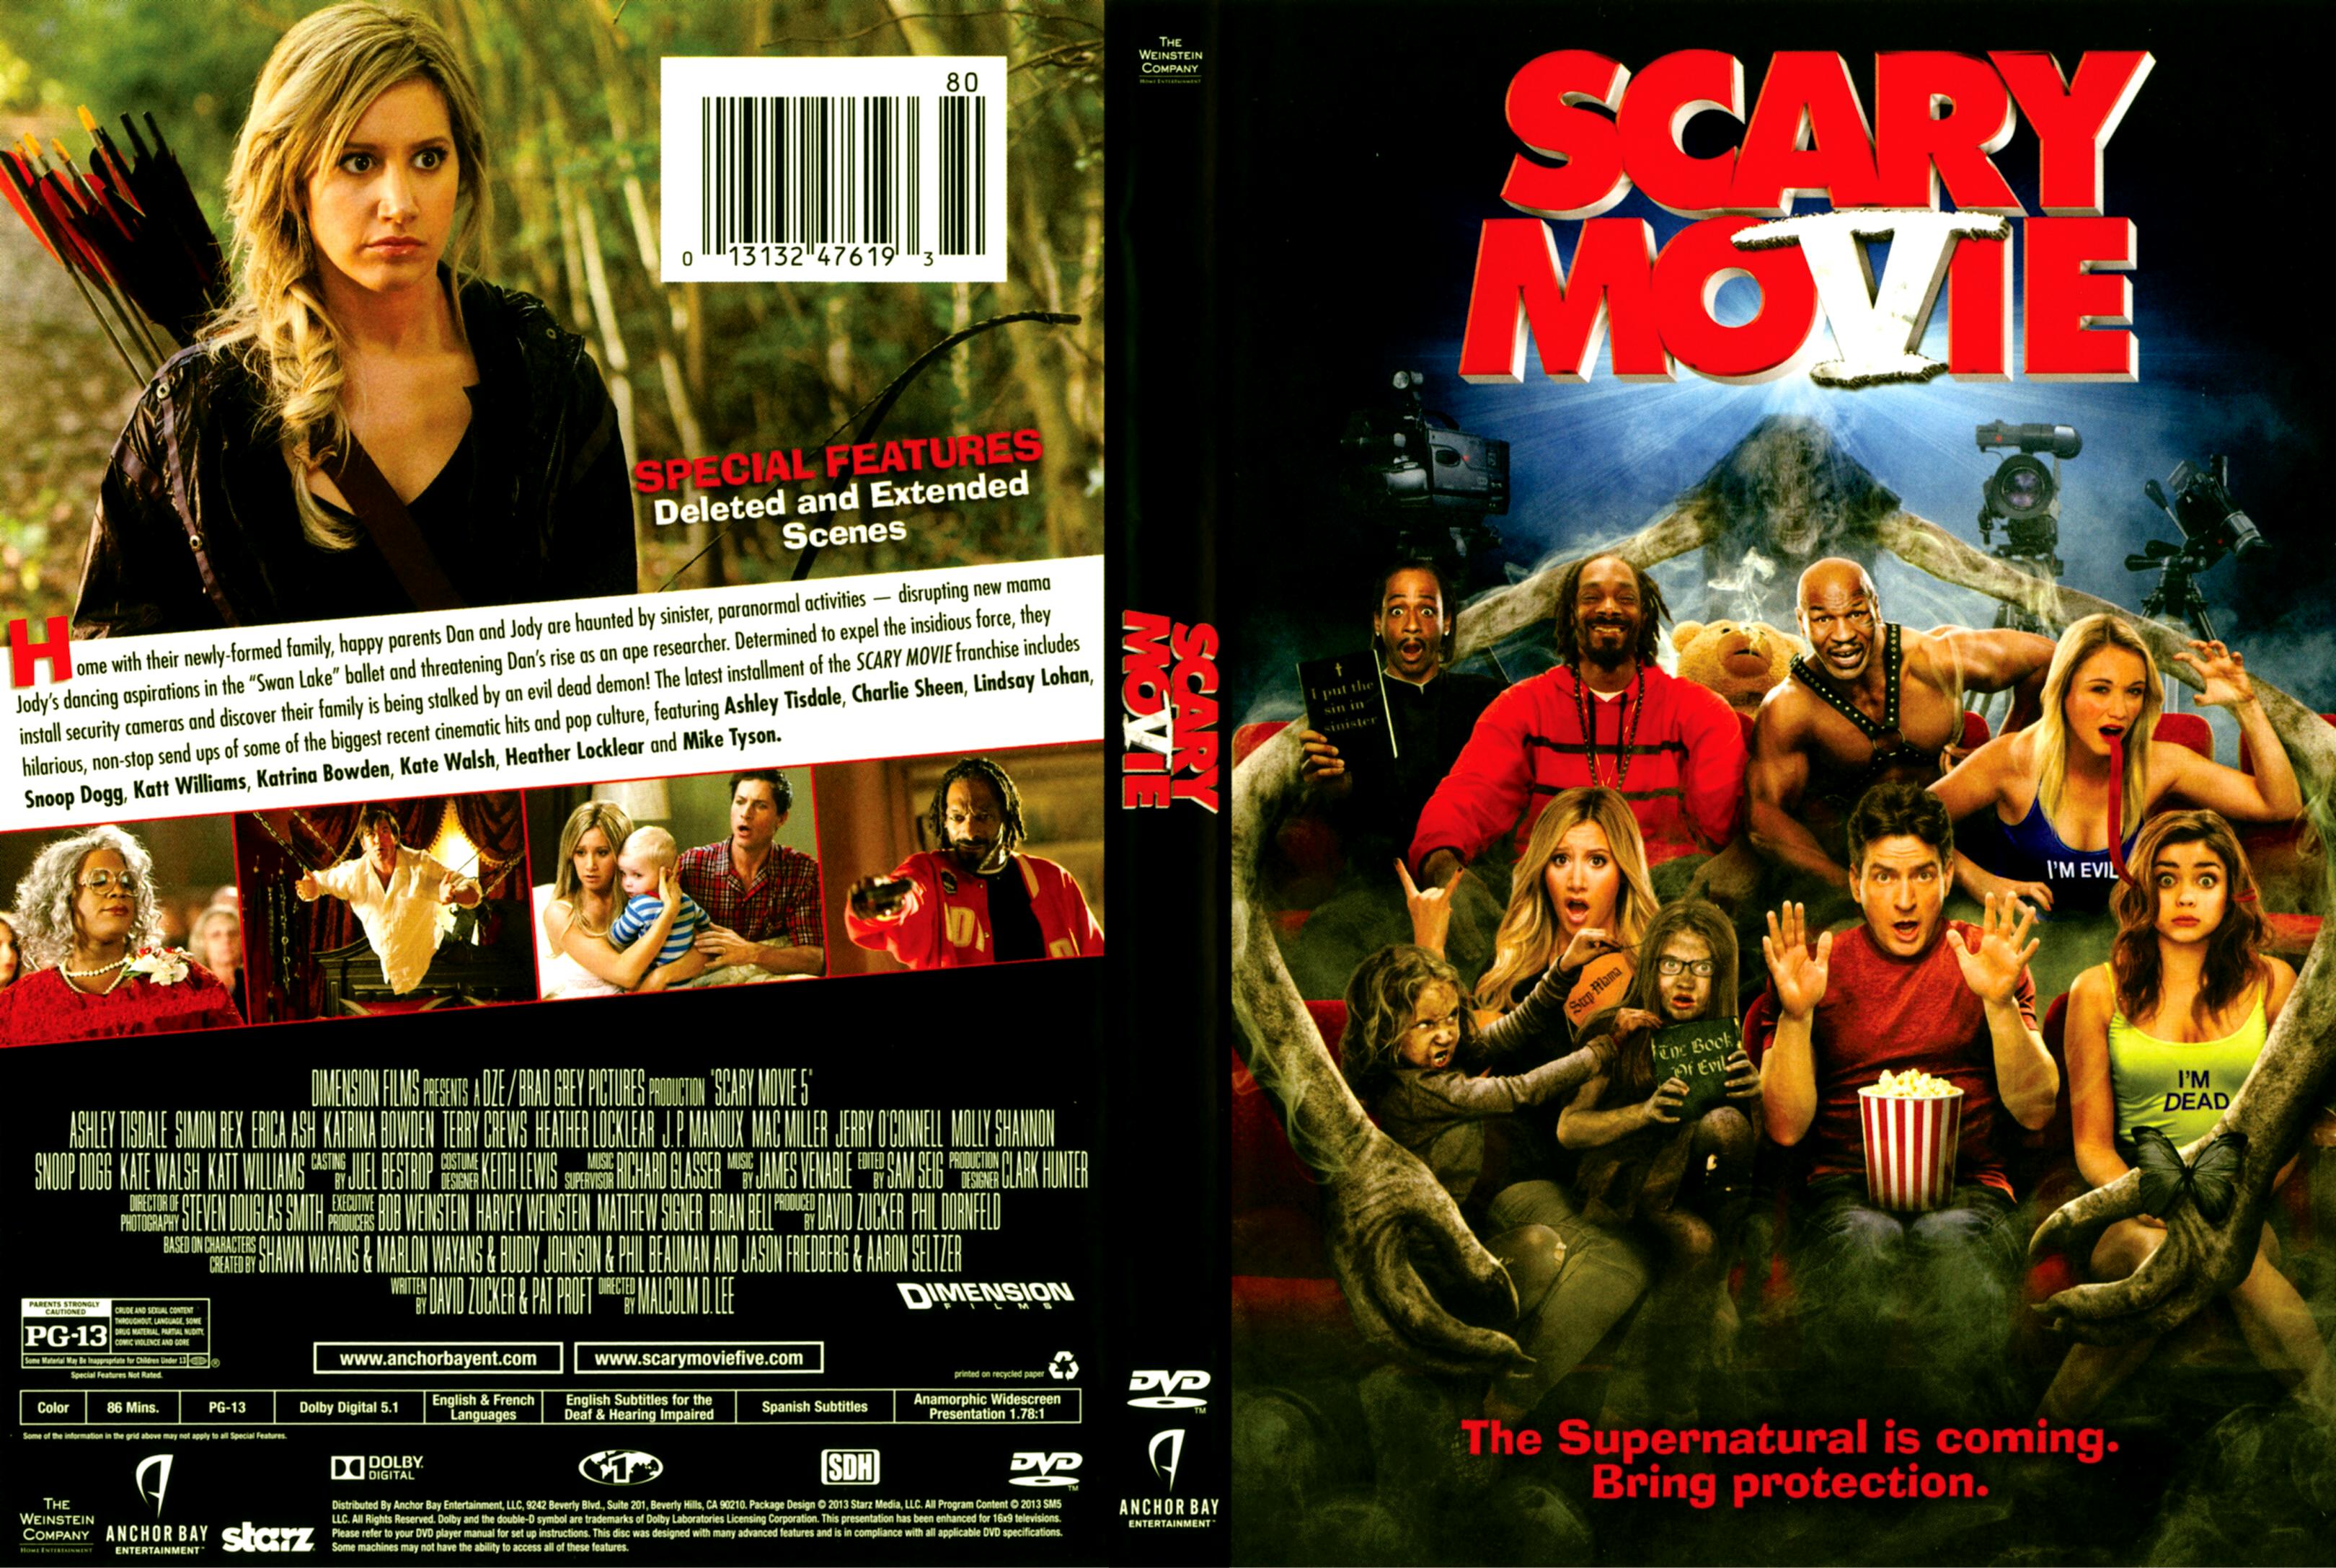 Jaquette DVD Scary Movie 5 Zone 1